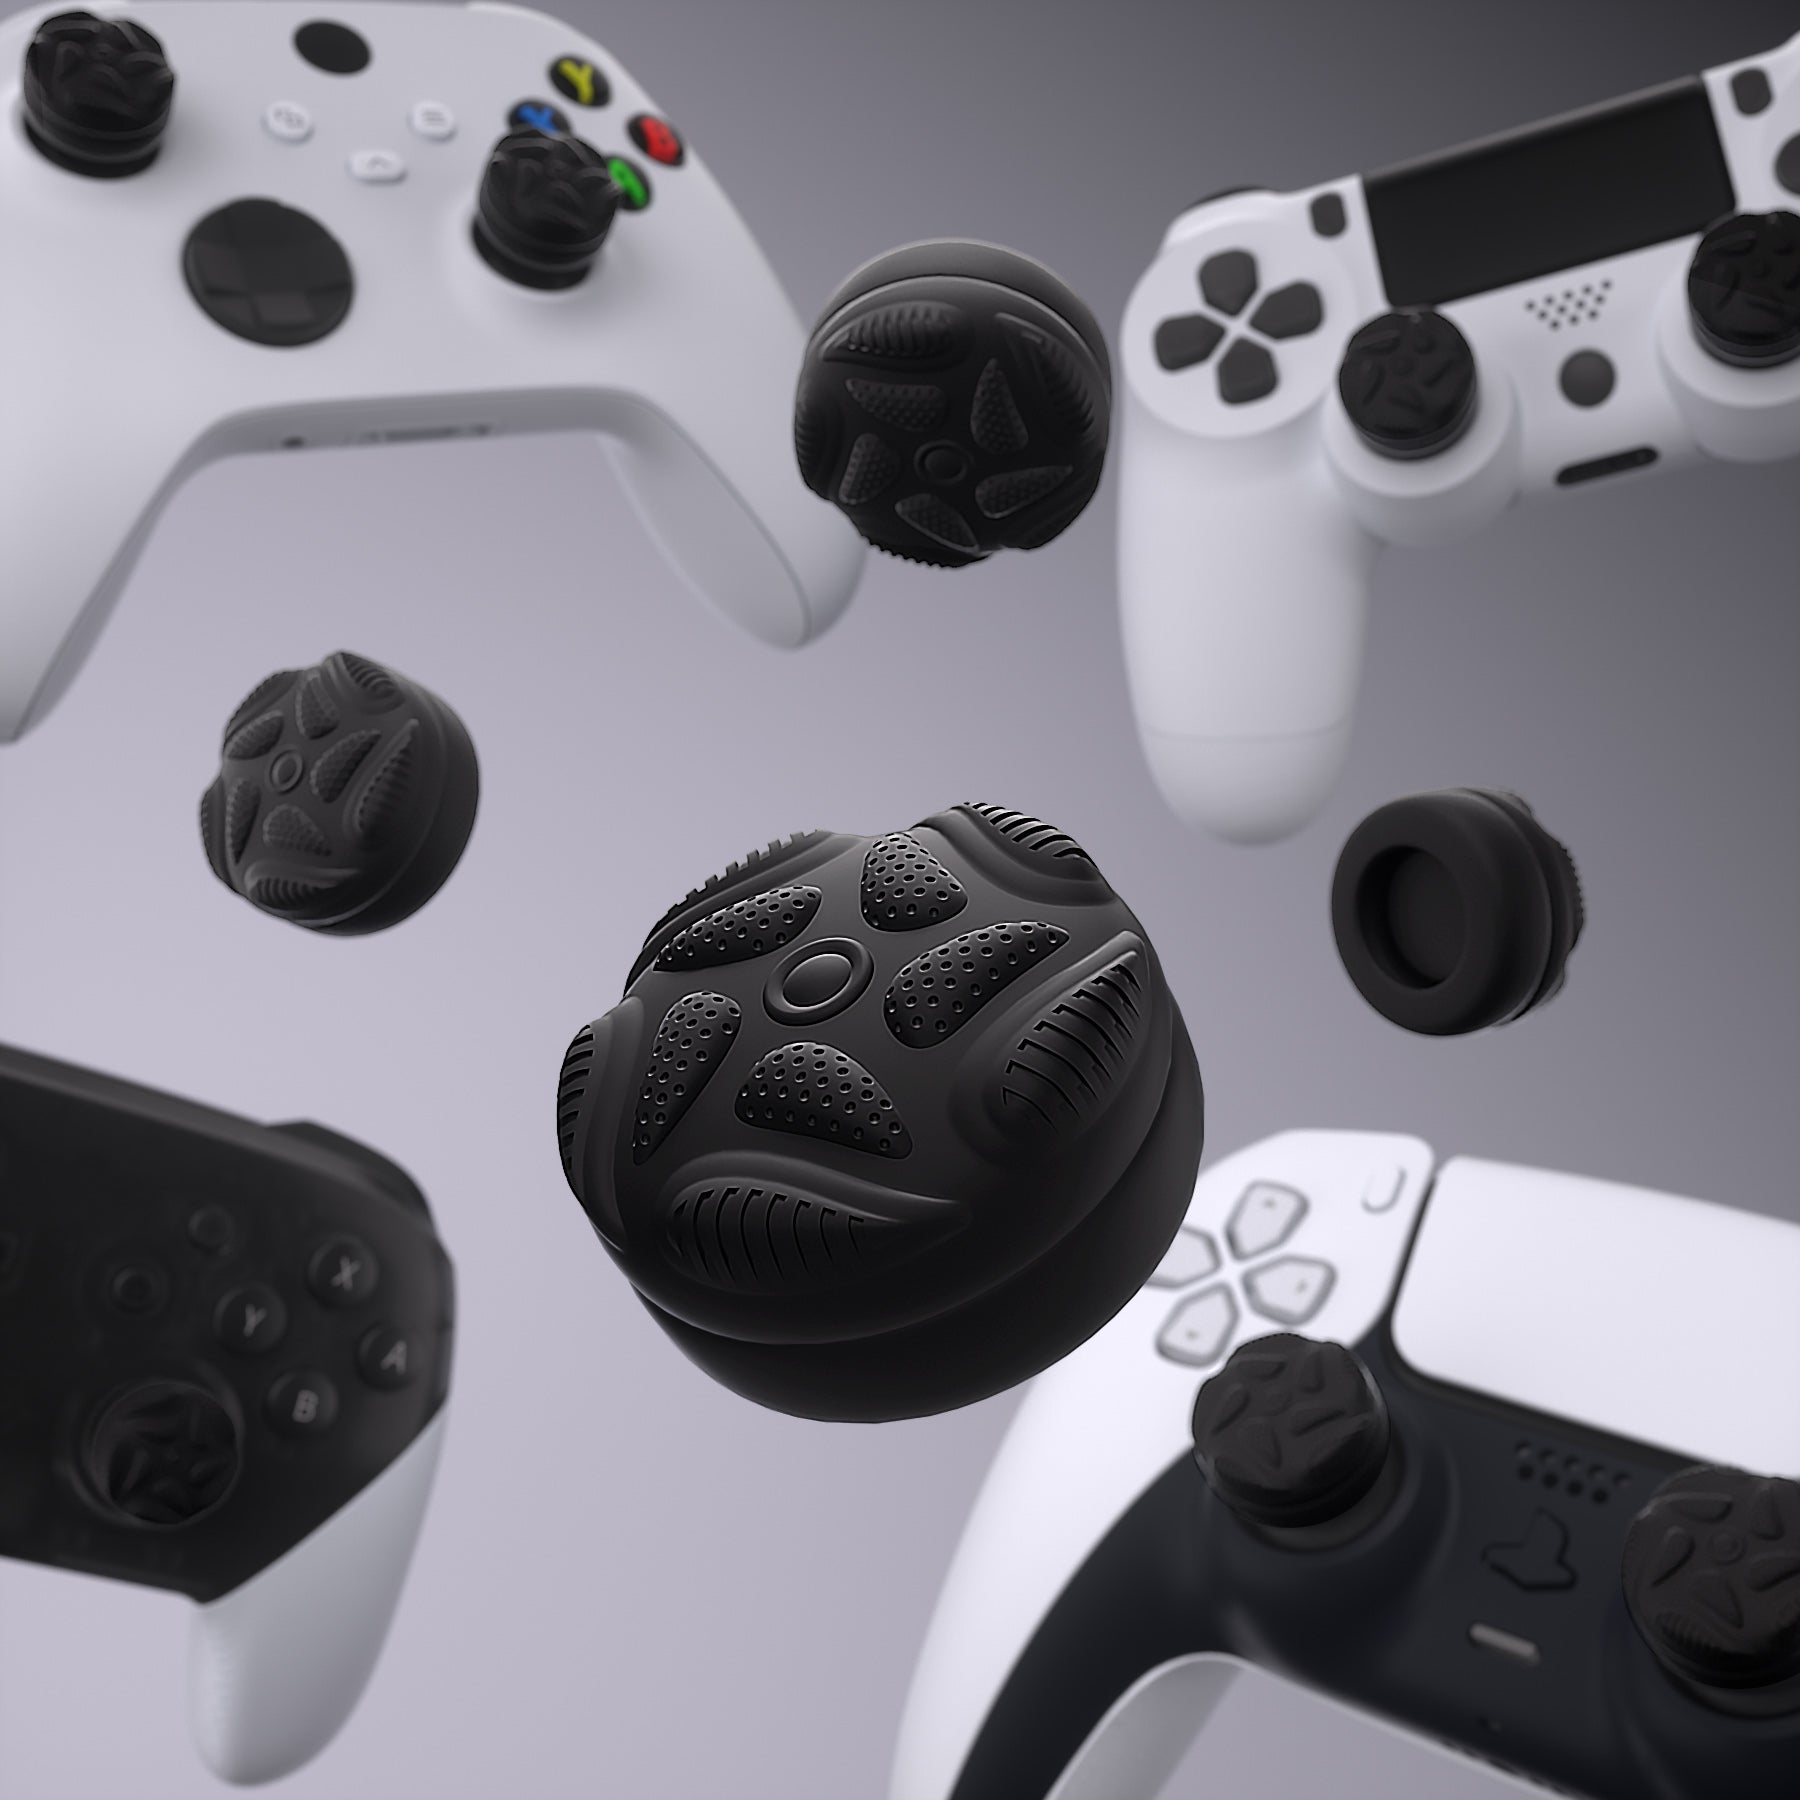 PlayVital Thumbs Cushion Caps Thumb Grips for ps5/4, Thumbstick Grip Cover for Xbox Series X/S, Thumb Grip Caps for Xbox One, Elite Series 2, for Switch Pro Controller - Raindrop Texture Design Black - PJM3033 PlayVital